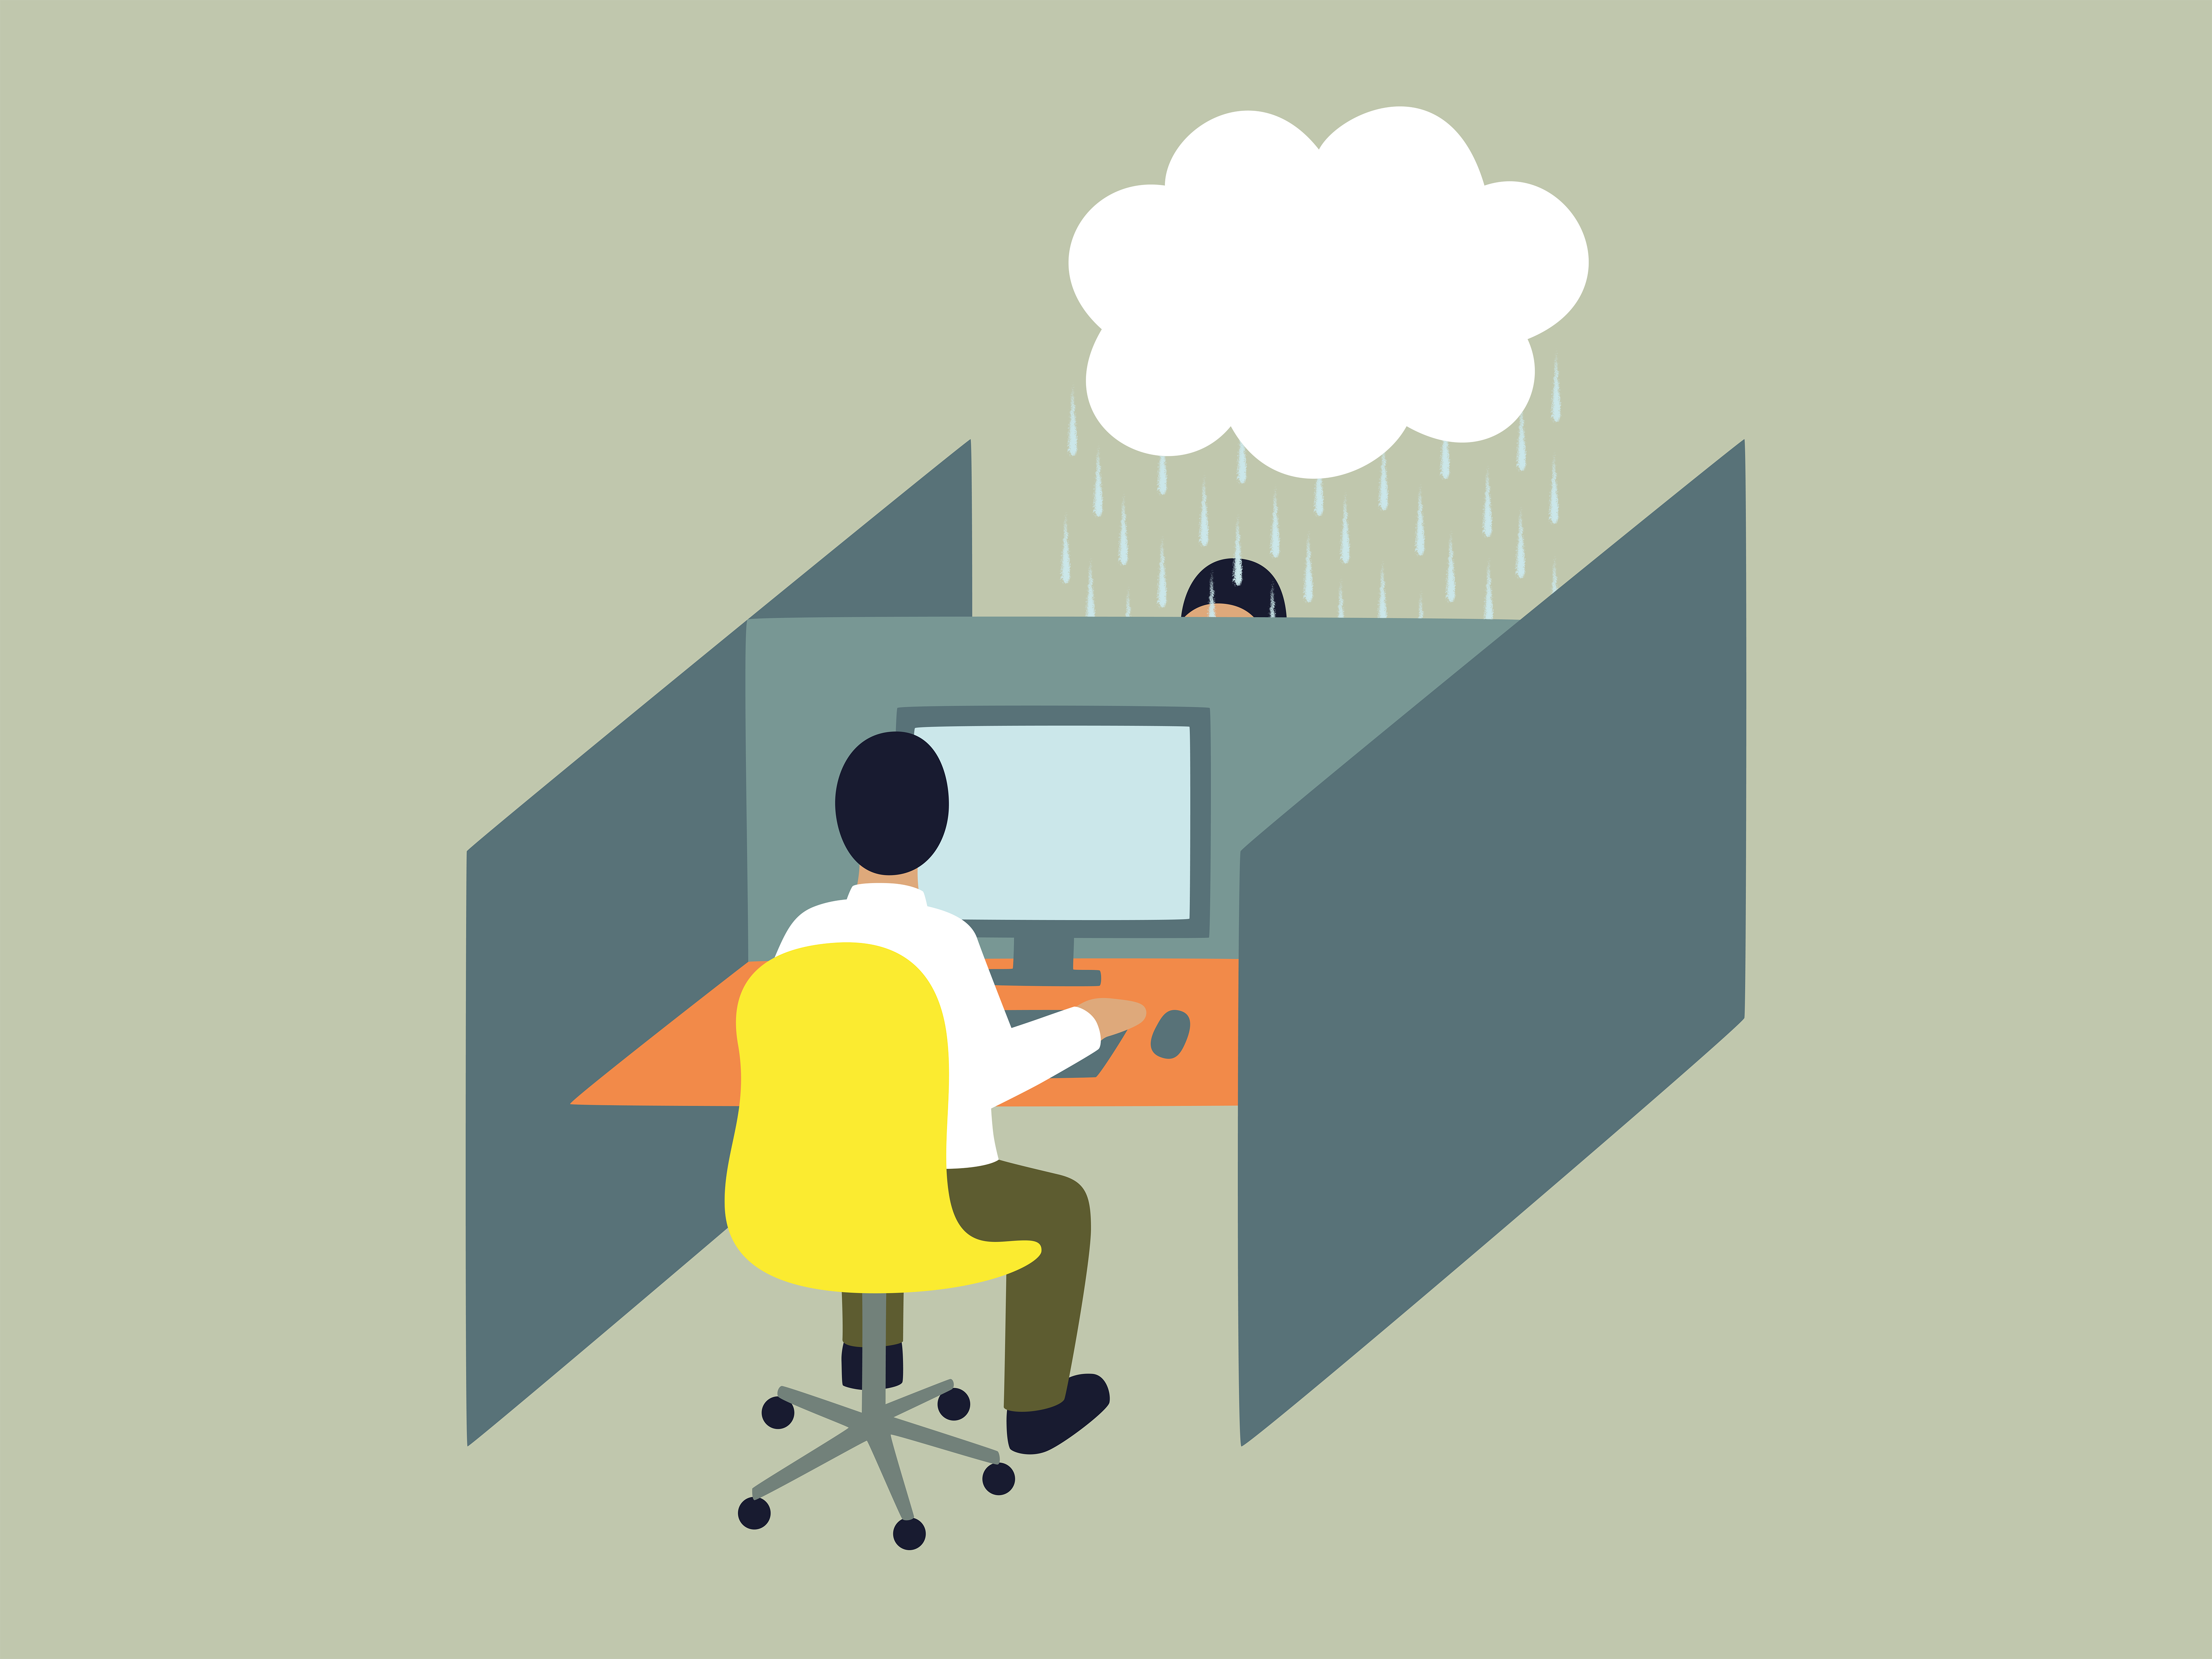 Illustration of a person in a cubicle. The neighbouring cubicle shows another person with a cloud above their head, signifying mental illness.